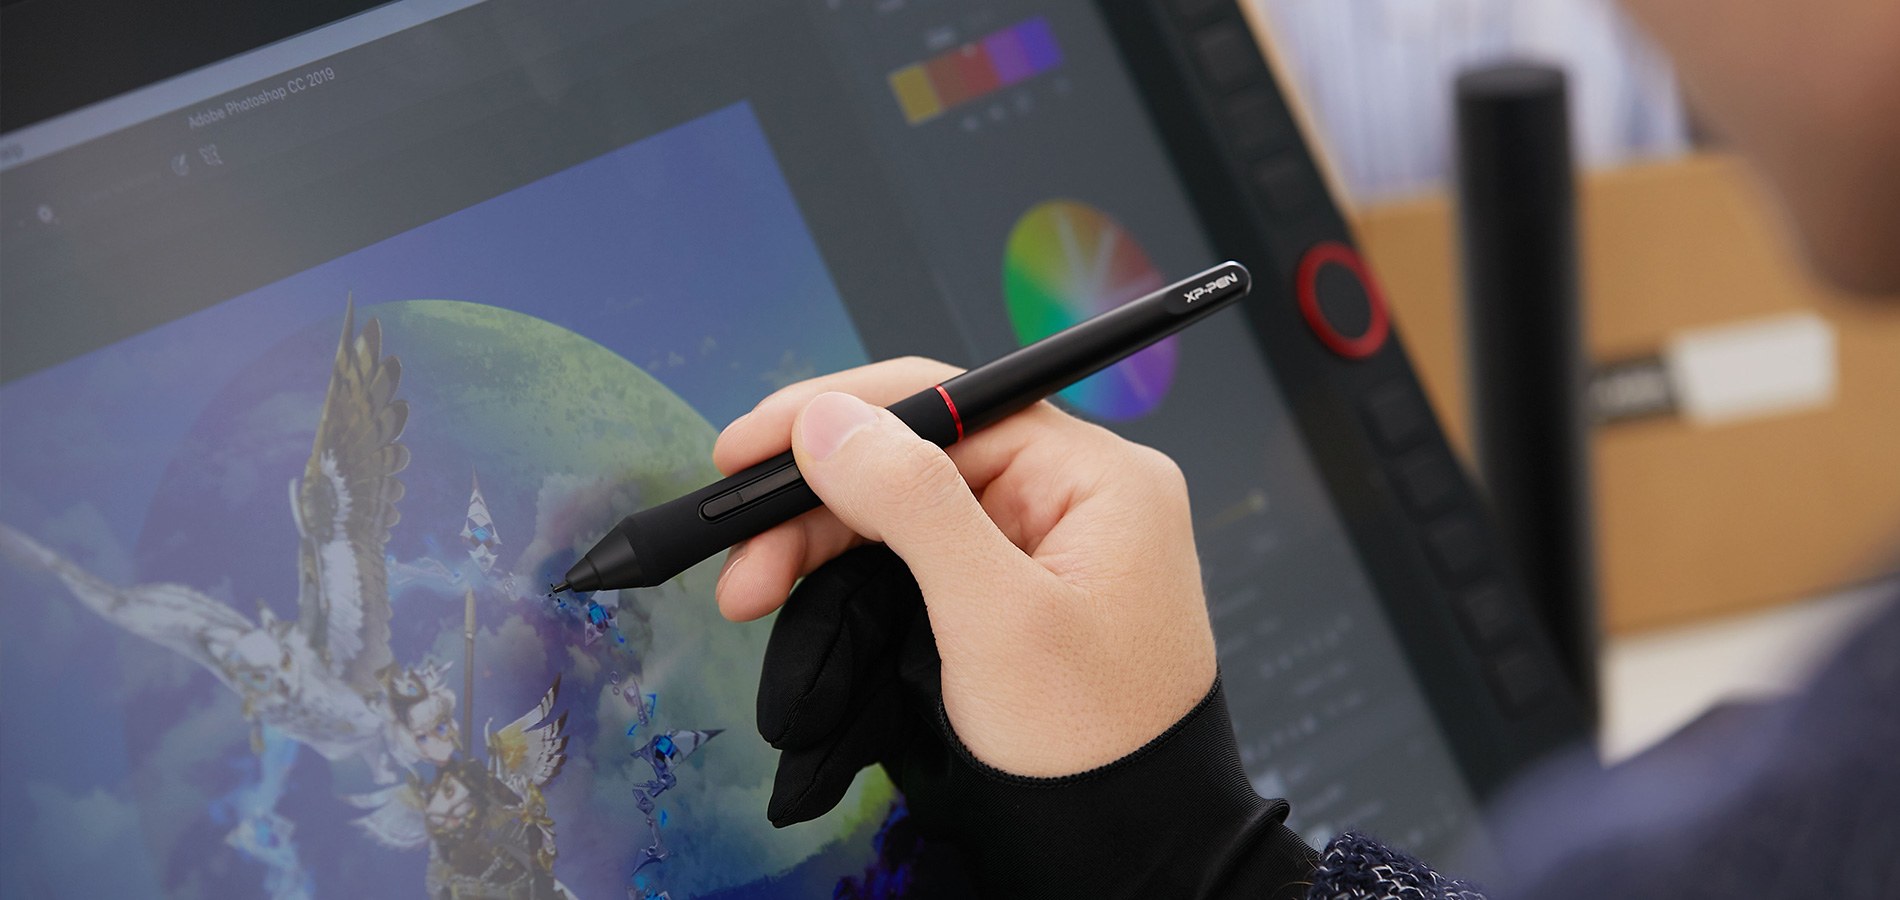 digital writing , drawing and painting on XP-Pen Artist 22R Pro Graphic Pen Display